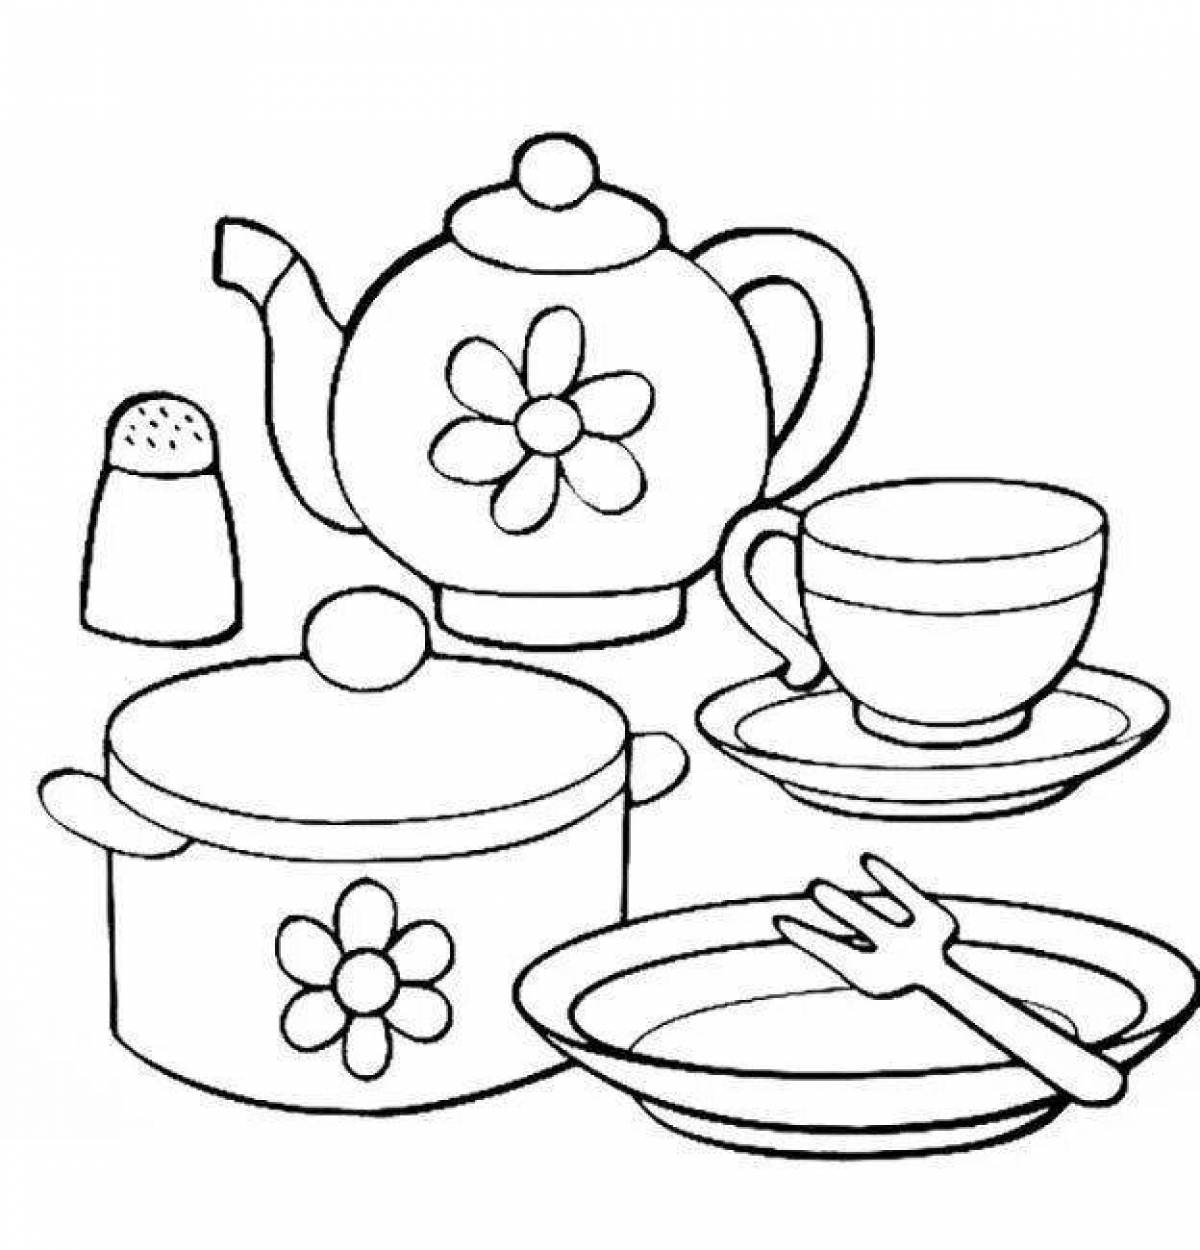 Coloring Page of Complex Tableware